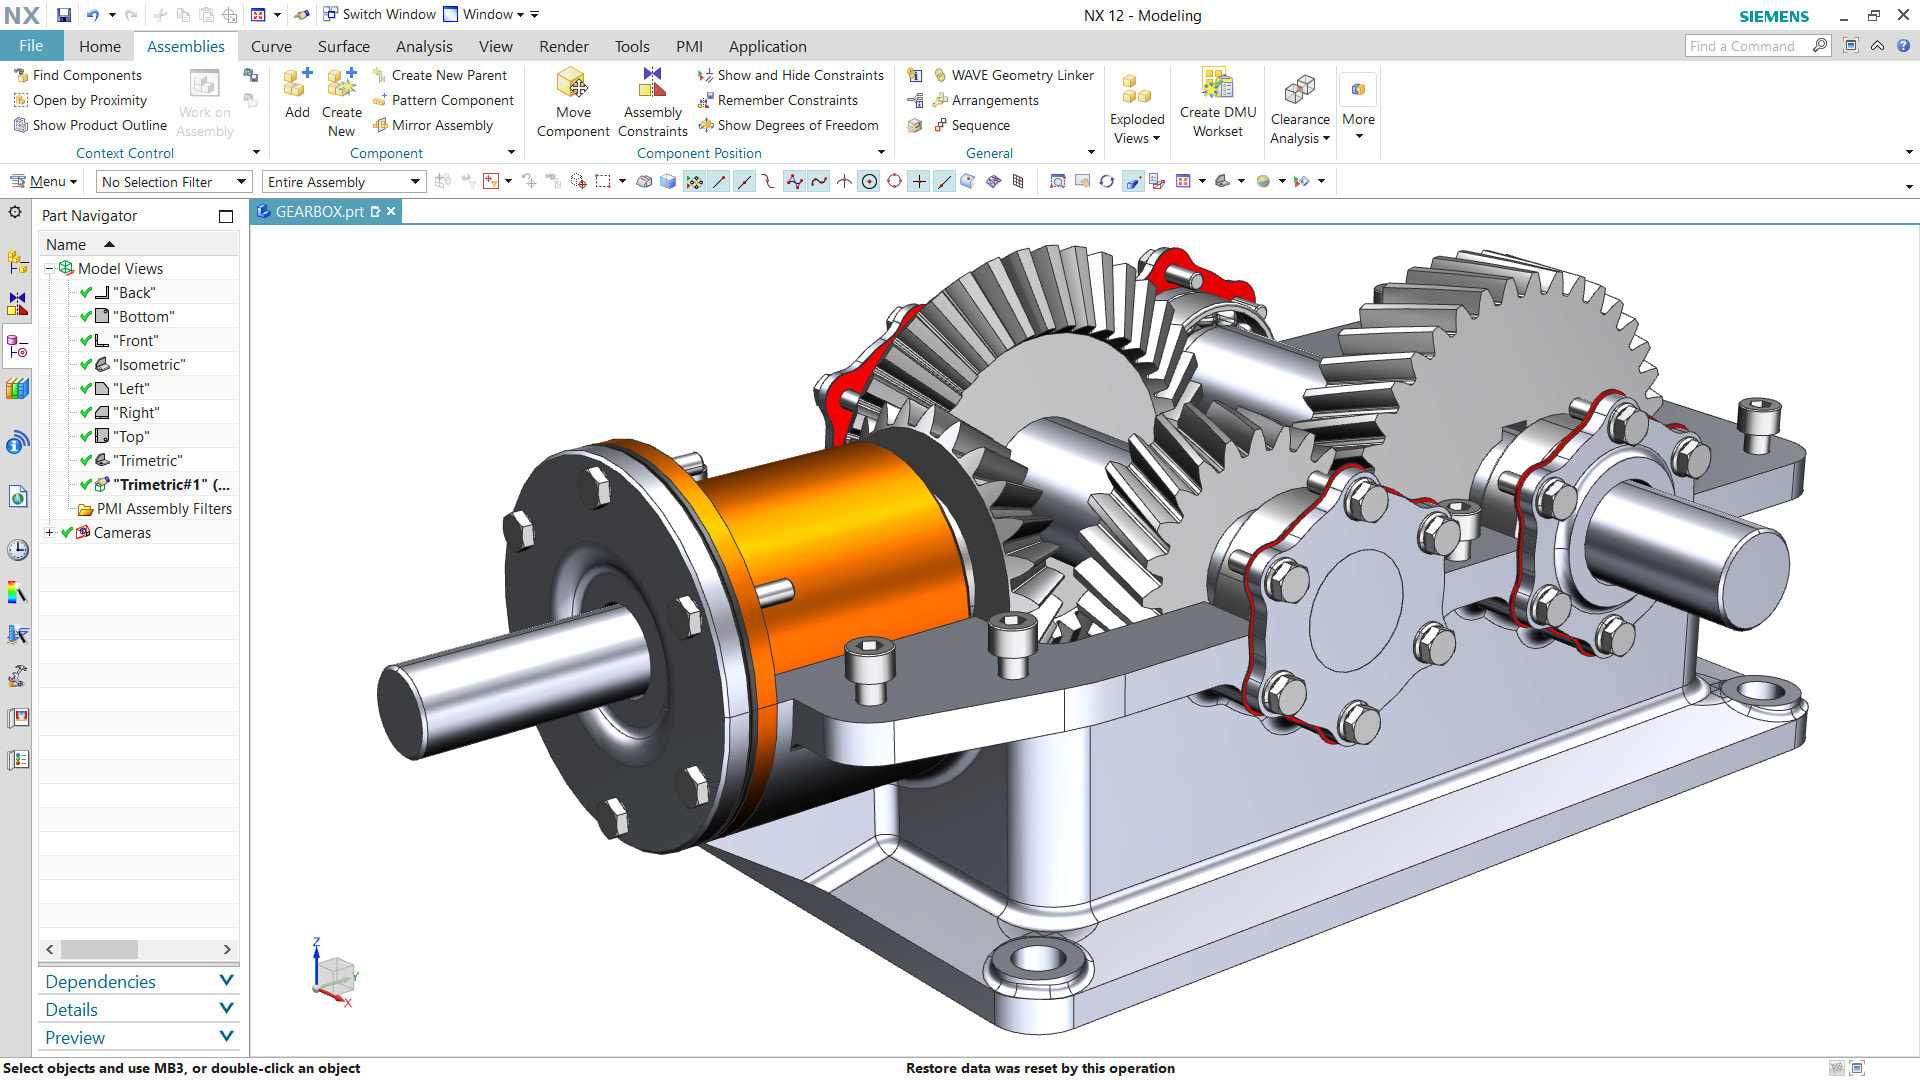 Siemens Delivers Artificial Intelligencepowered CAD Sketching in NX